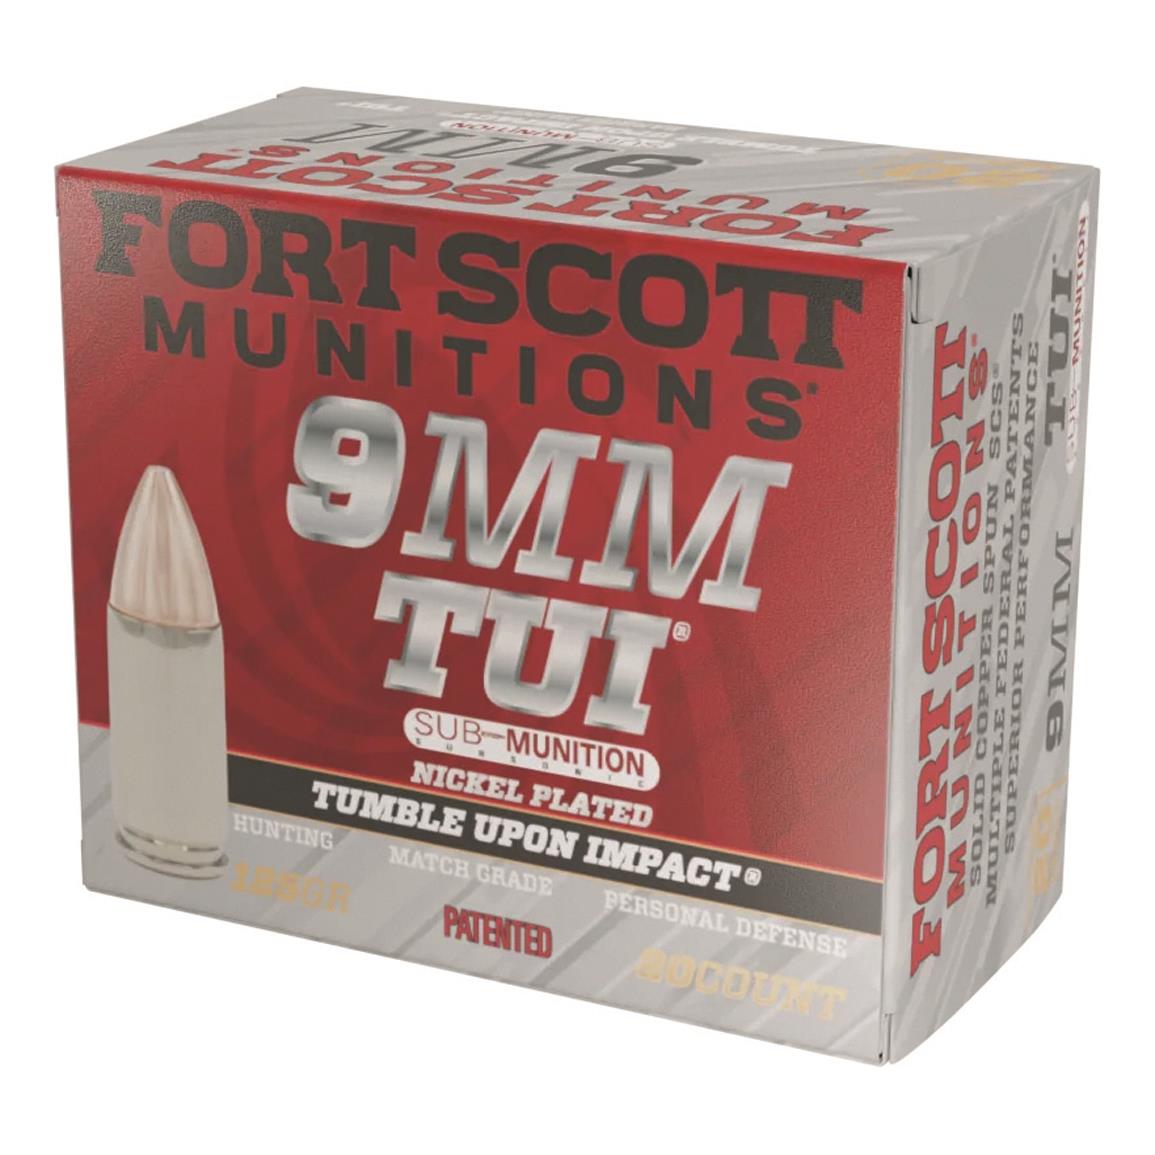 Fort Scott Tumble Upon Impact Sub-Munition Subsonic Nickel-Plated, 9mm, SCS, 125 Grain, 20 Rounds